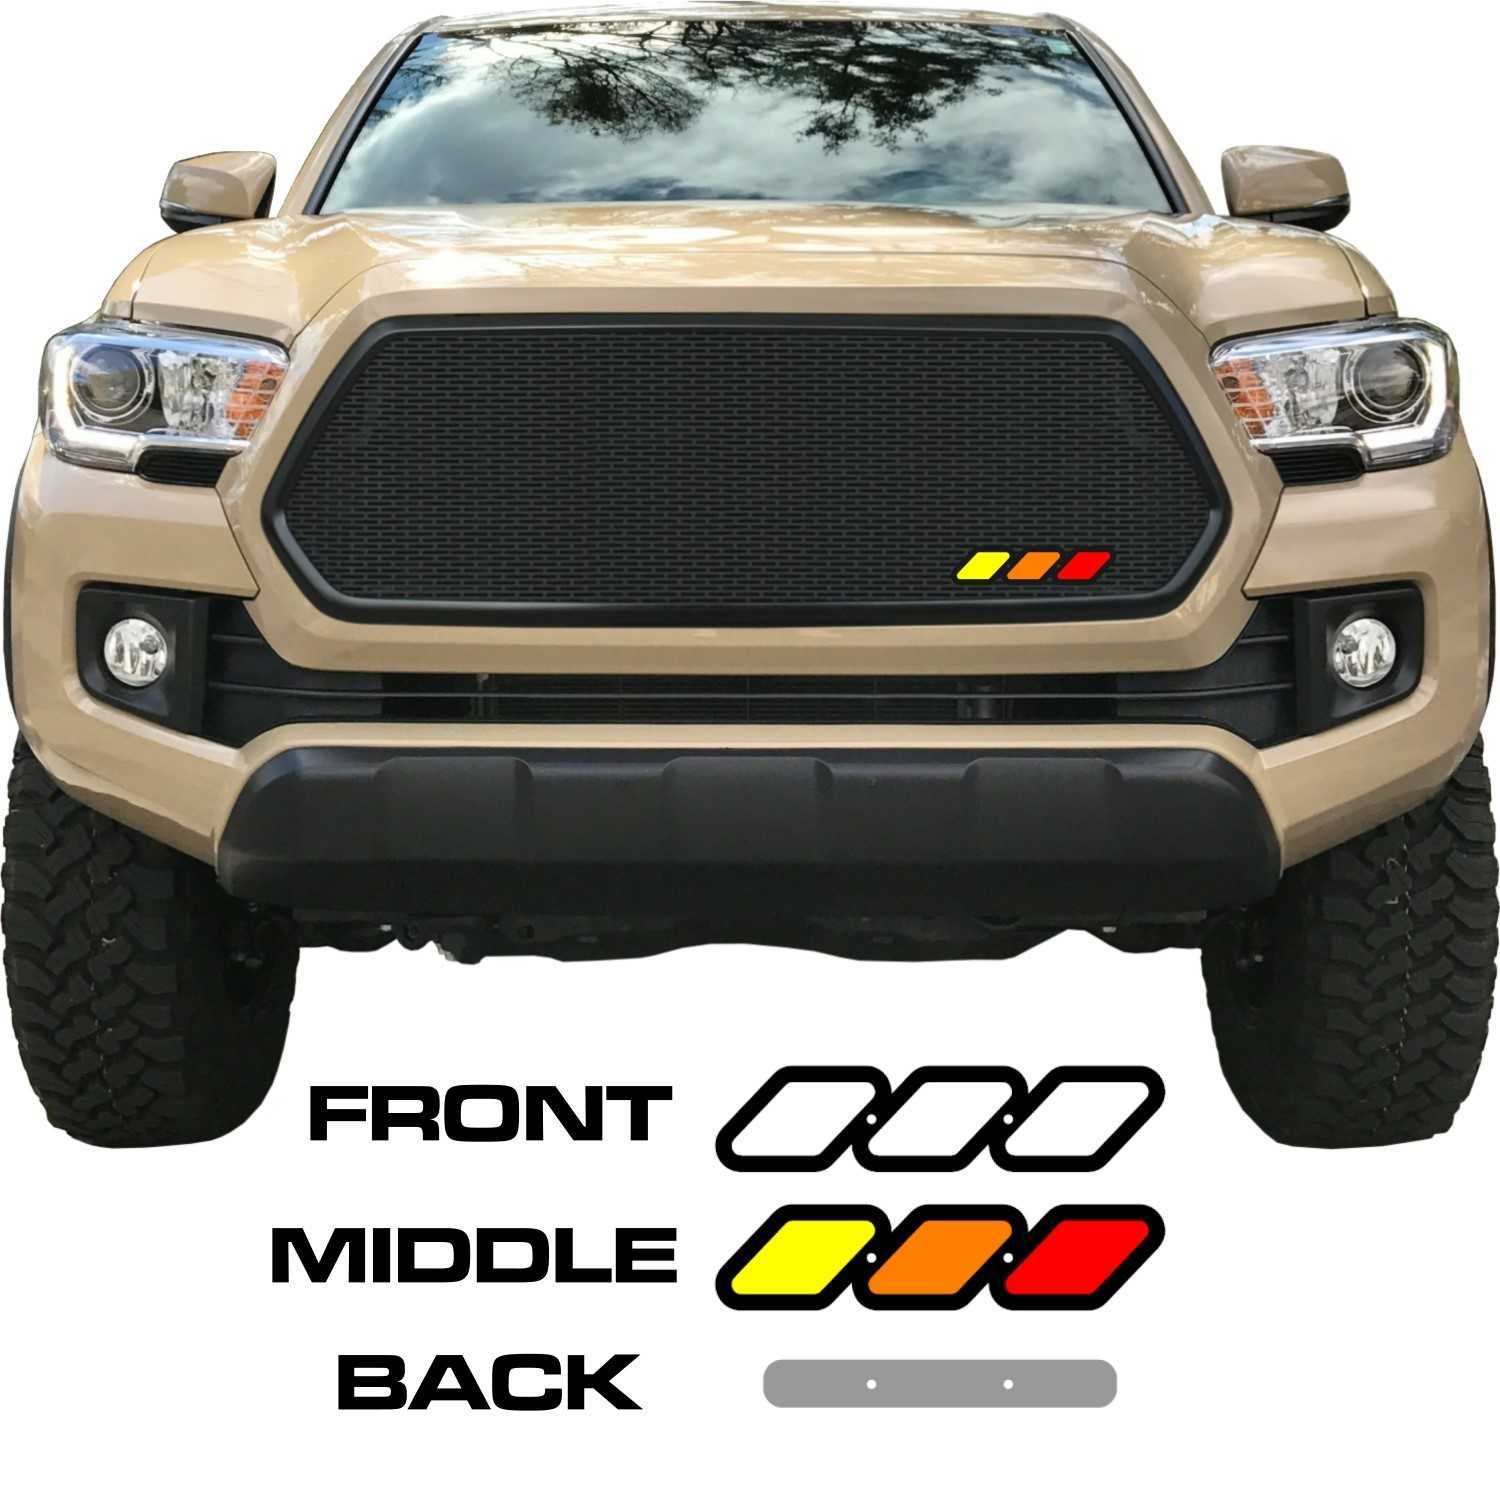 1.75in x 7in Tri-Color Emblem for Toyota Grilles